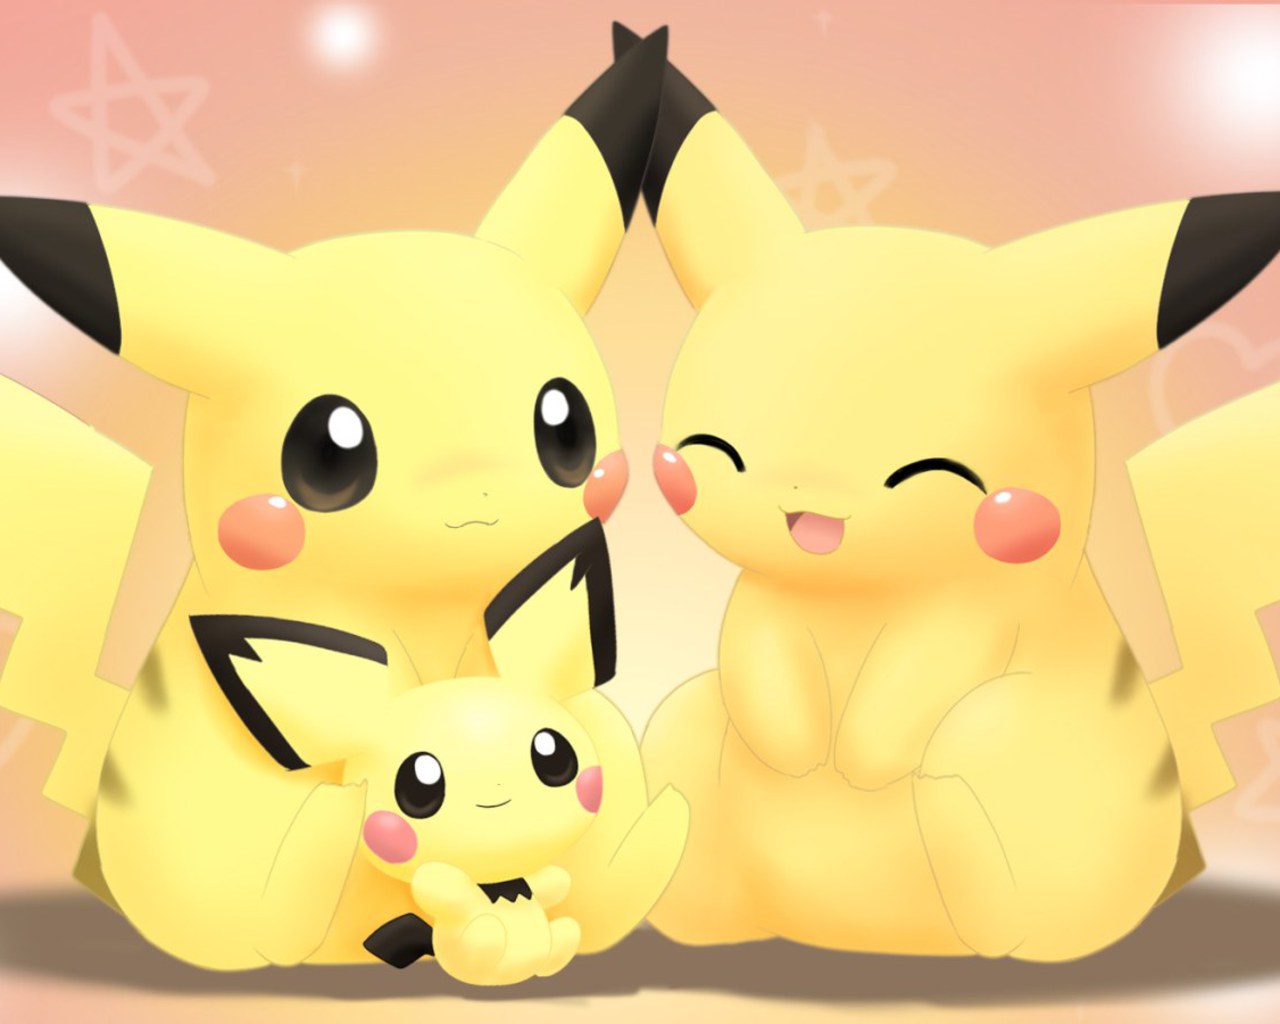 Family Wallpapers photos of free pikachu image wallpapers by Free